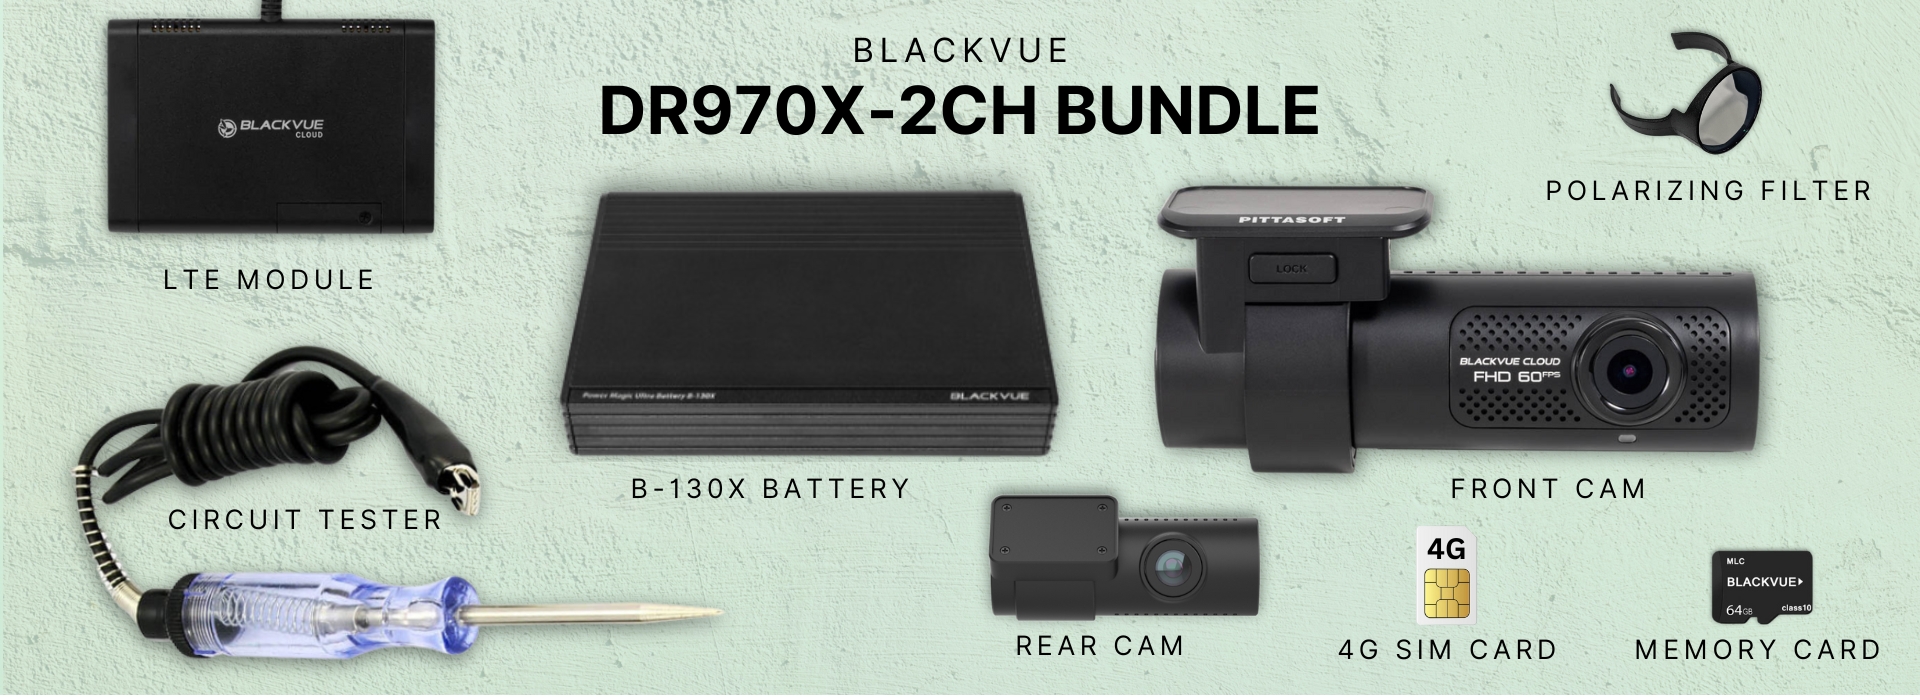 BlackVue DR970X-2CH Bundle | Everything You Need For Ultimate Protection banner